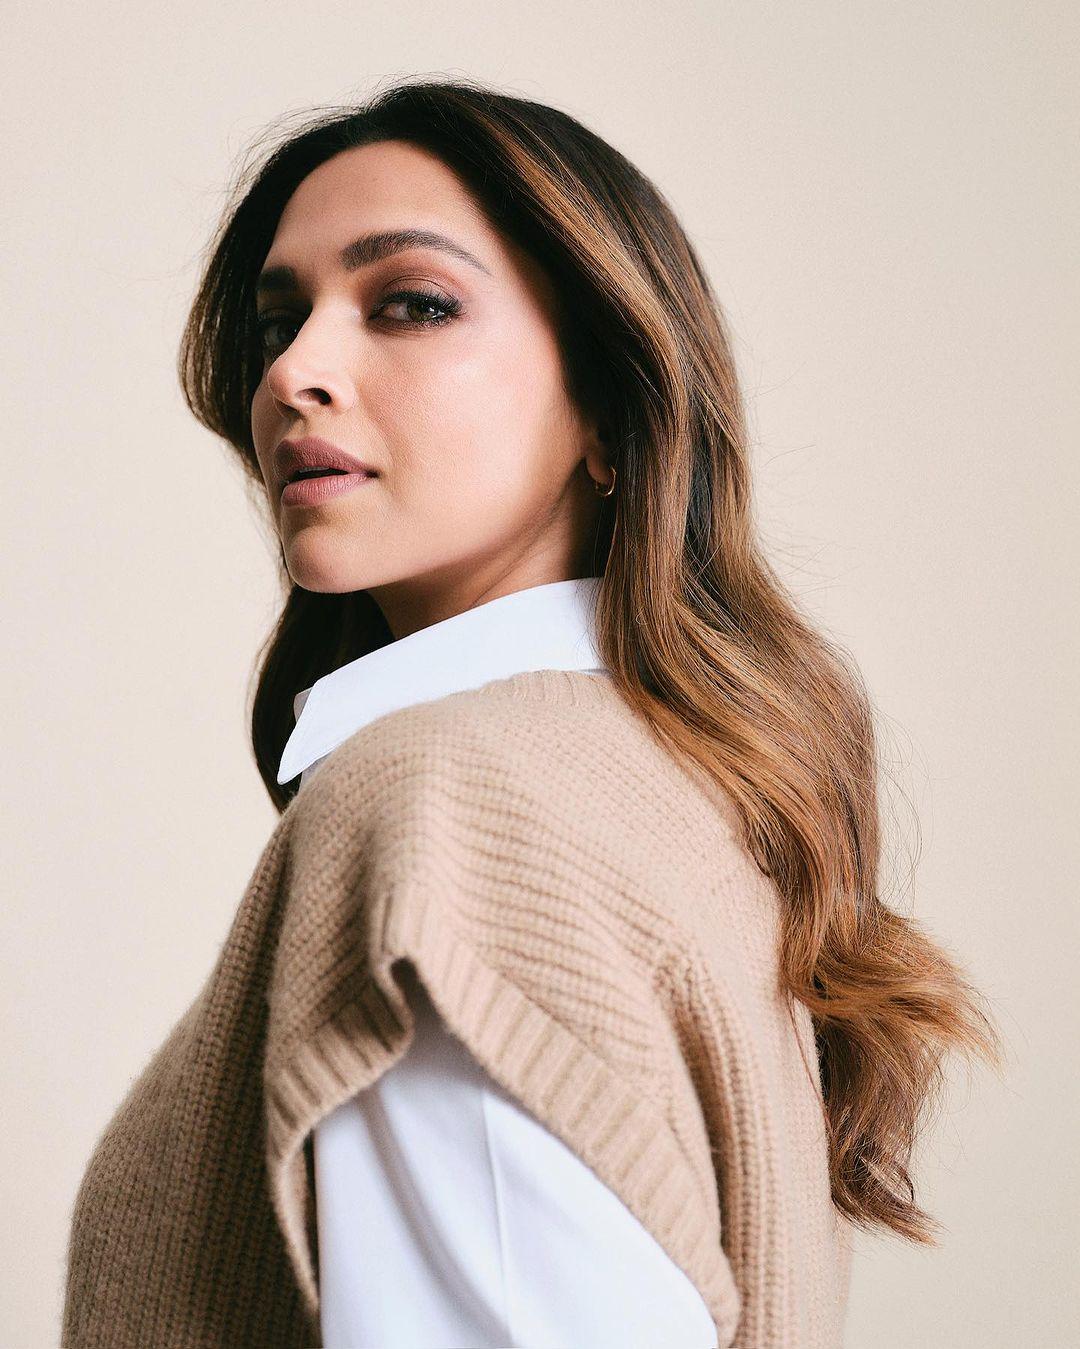 The Max Mara look was styled by Shaleen Nathani, while Deepika's hair was done by Yianni Tsapatori. 